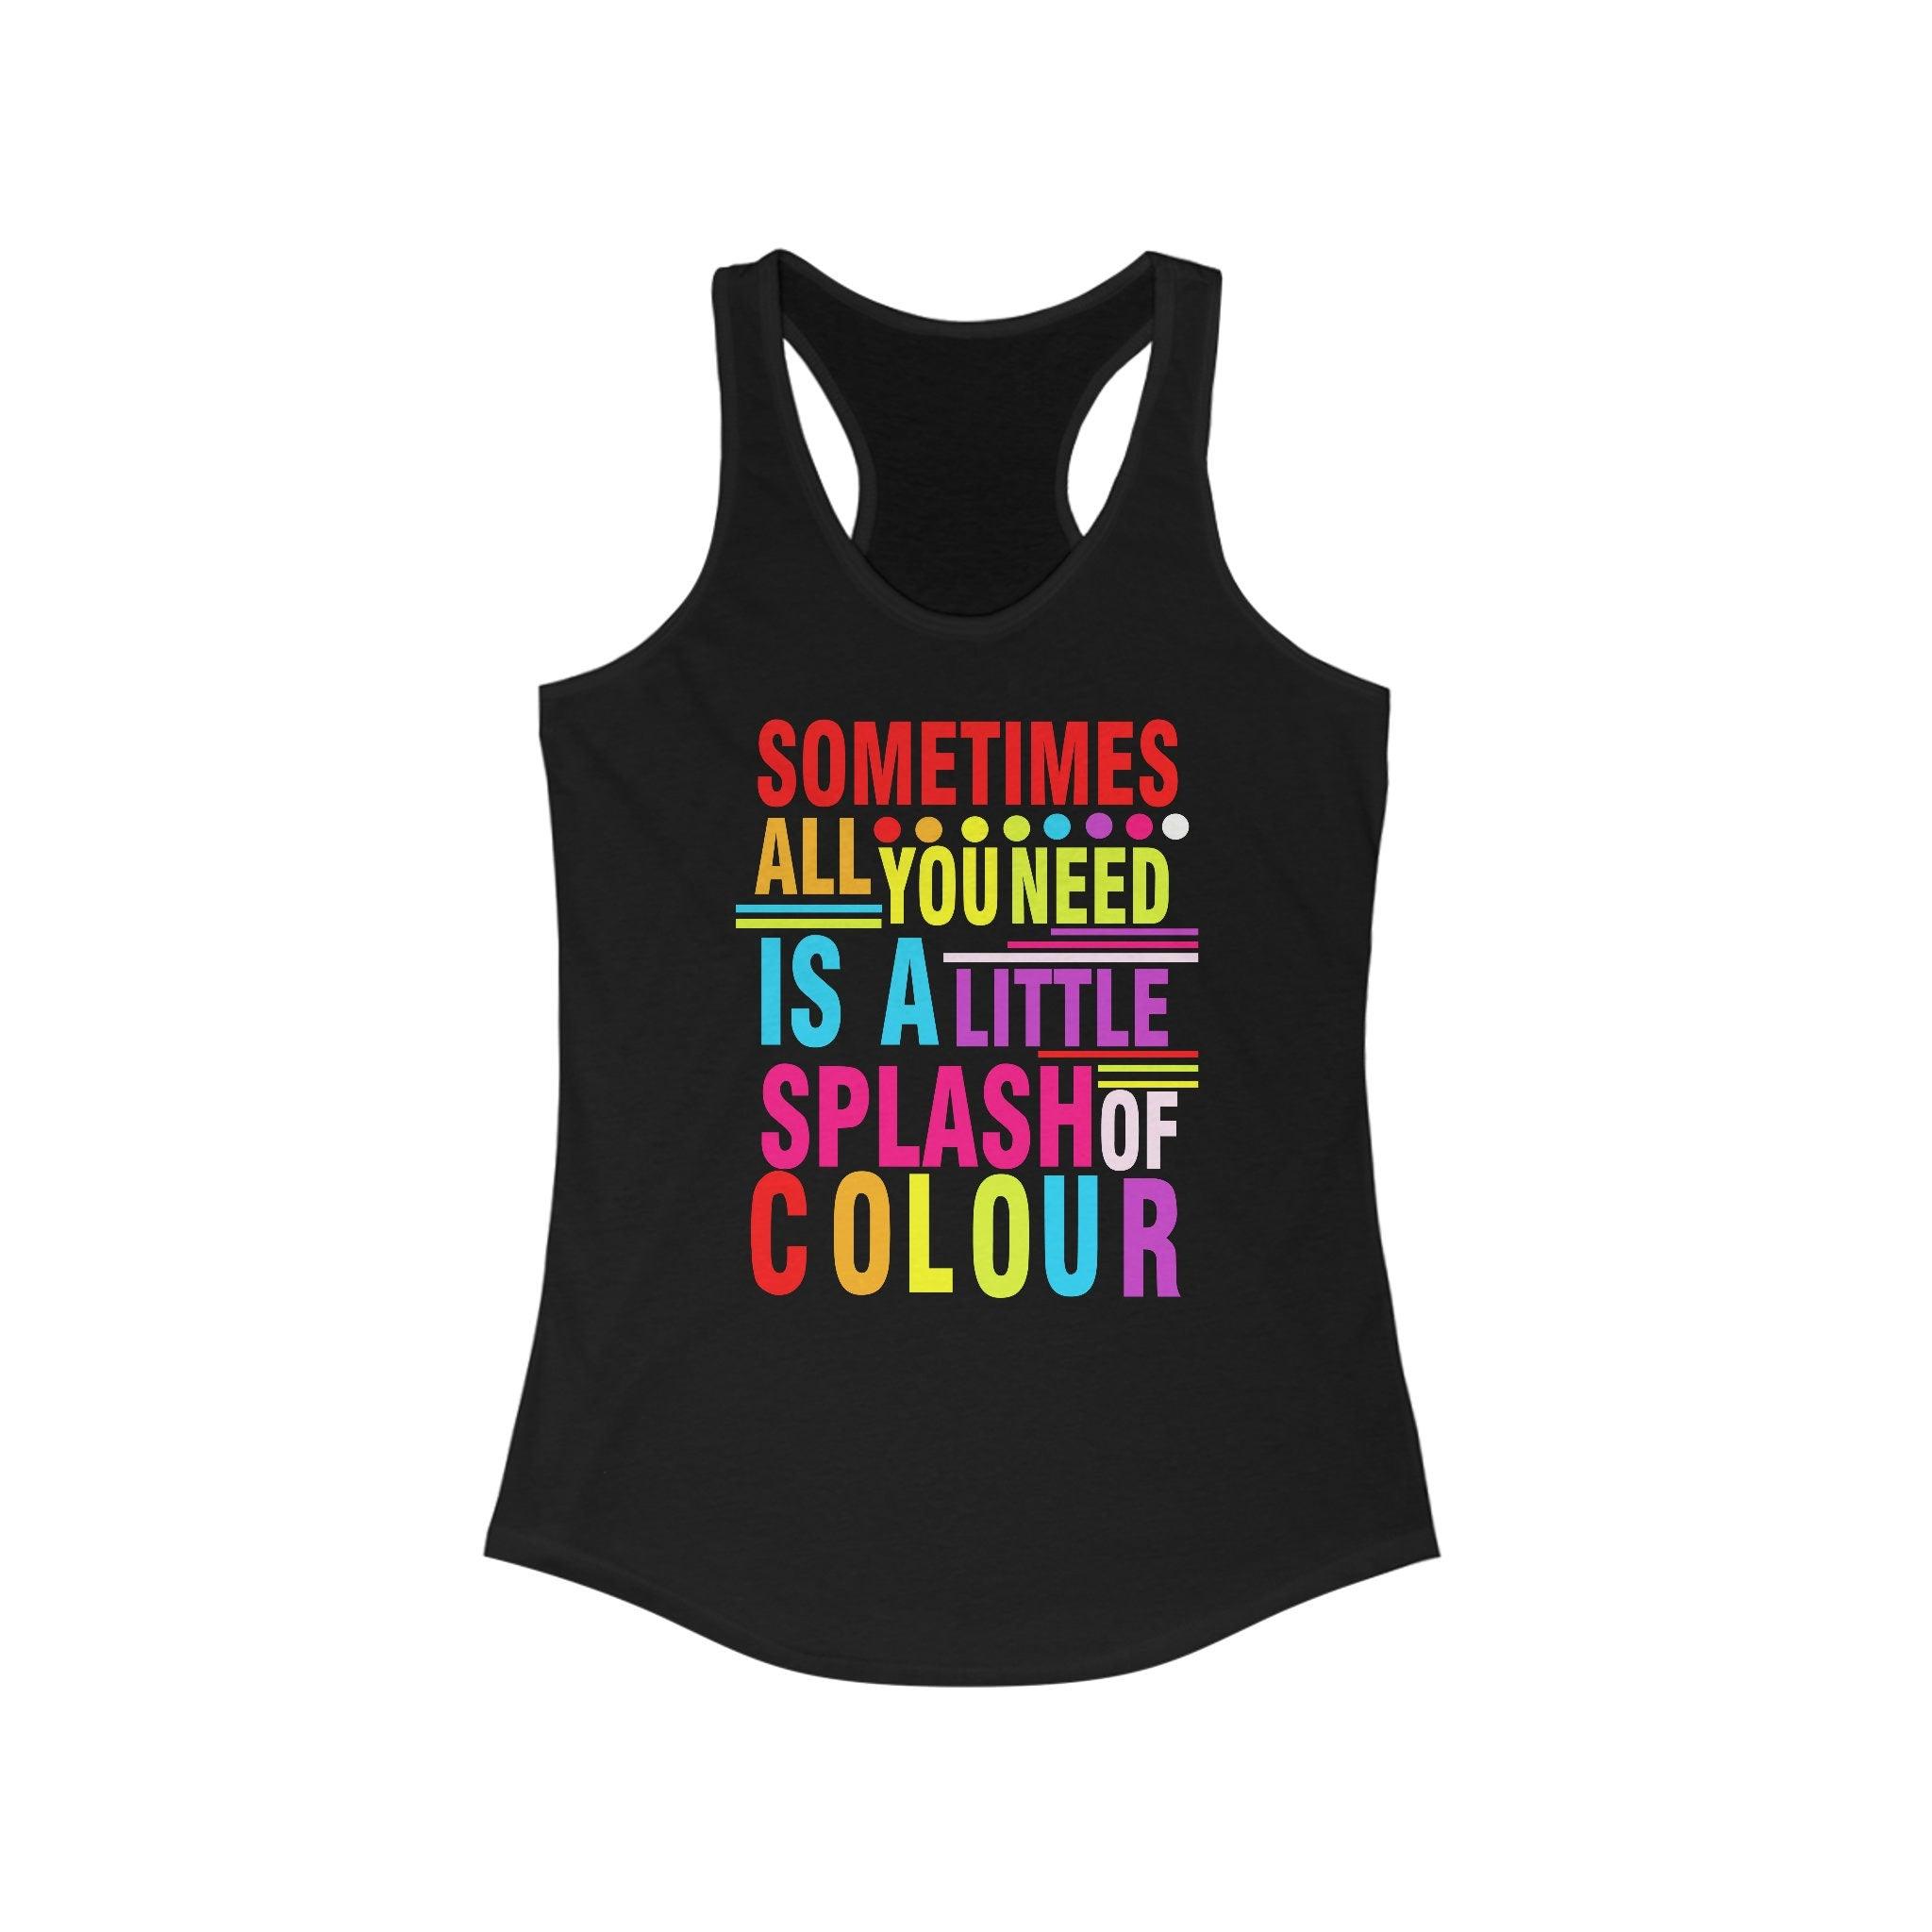 Sometimes All You Need Is A Little Splash Of Colour Racerback, With designs that are sure to brighten up any day - plusminusco.com